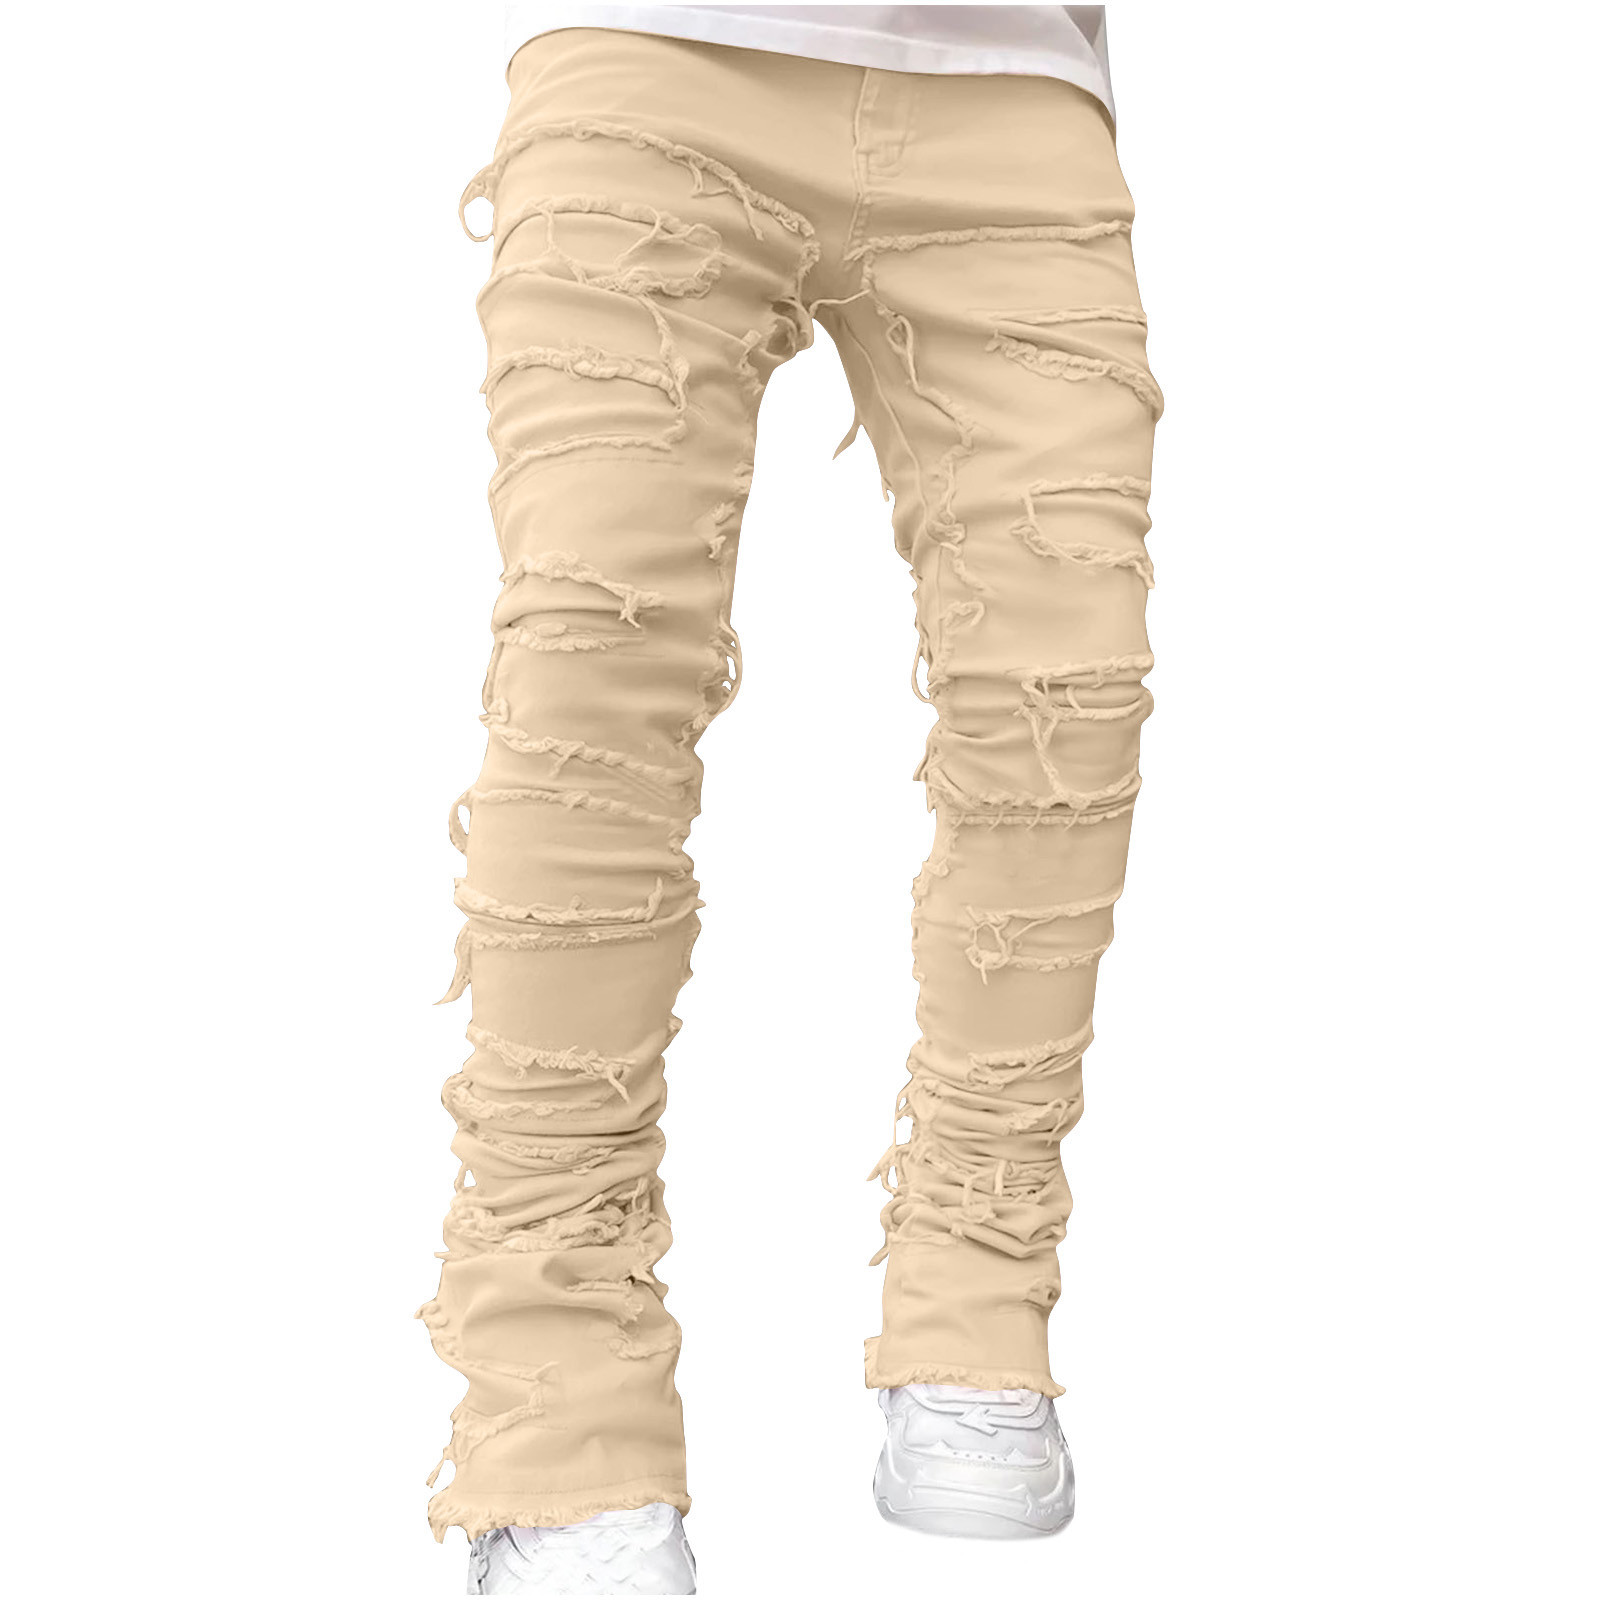 Dezsed Men's Slim Stretch Jeans Ripped Skinny Jeans for Men, Distressed ...